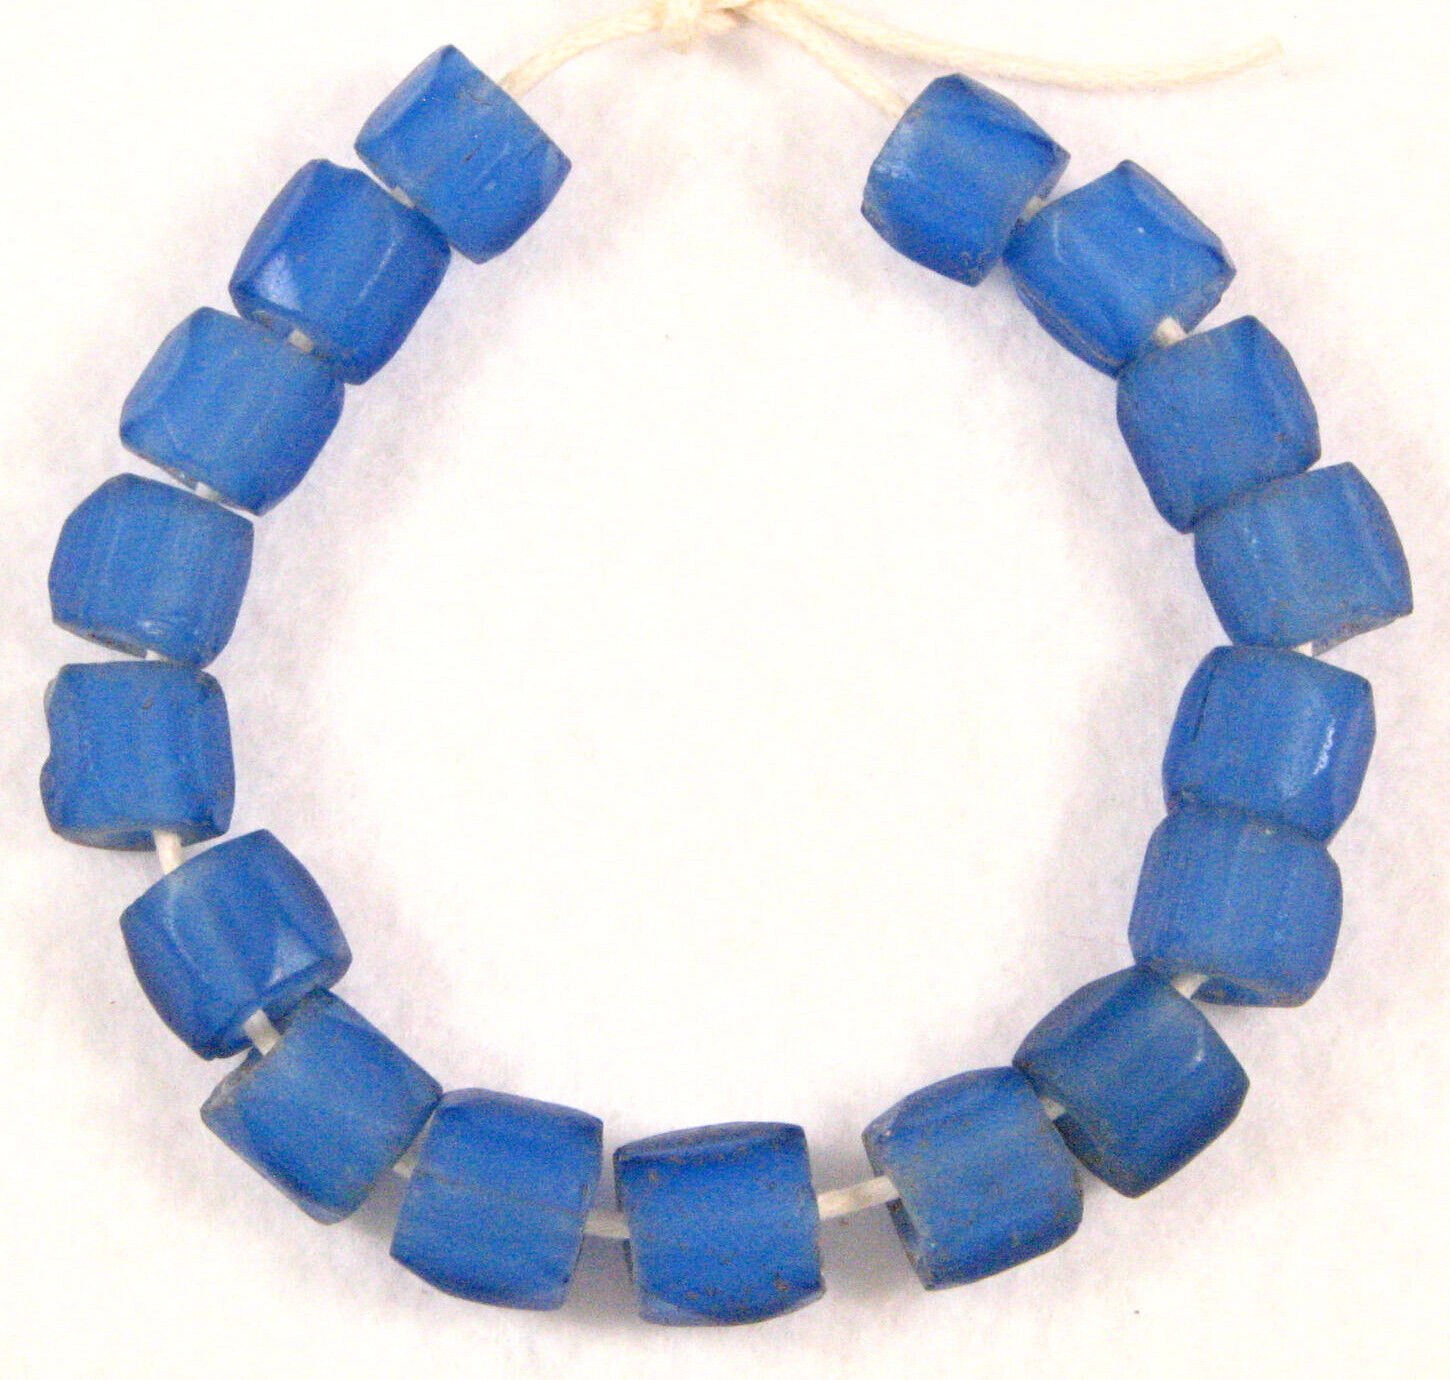 17 Old RUSSIAN BLUE Glass Trade Beads 8 to 9 mm diameter A